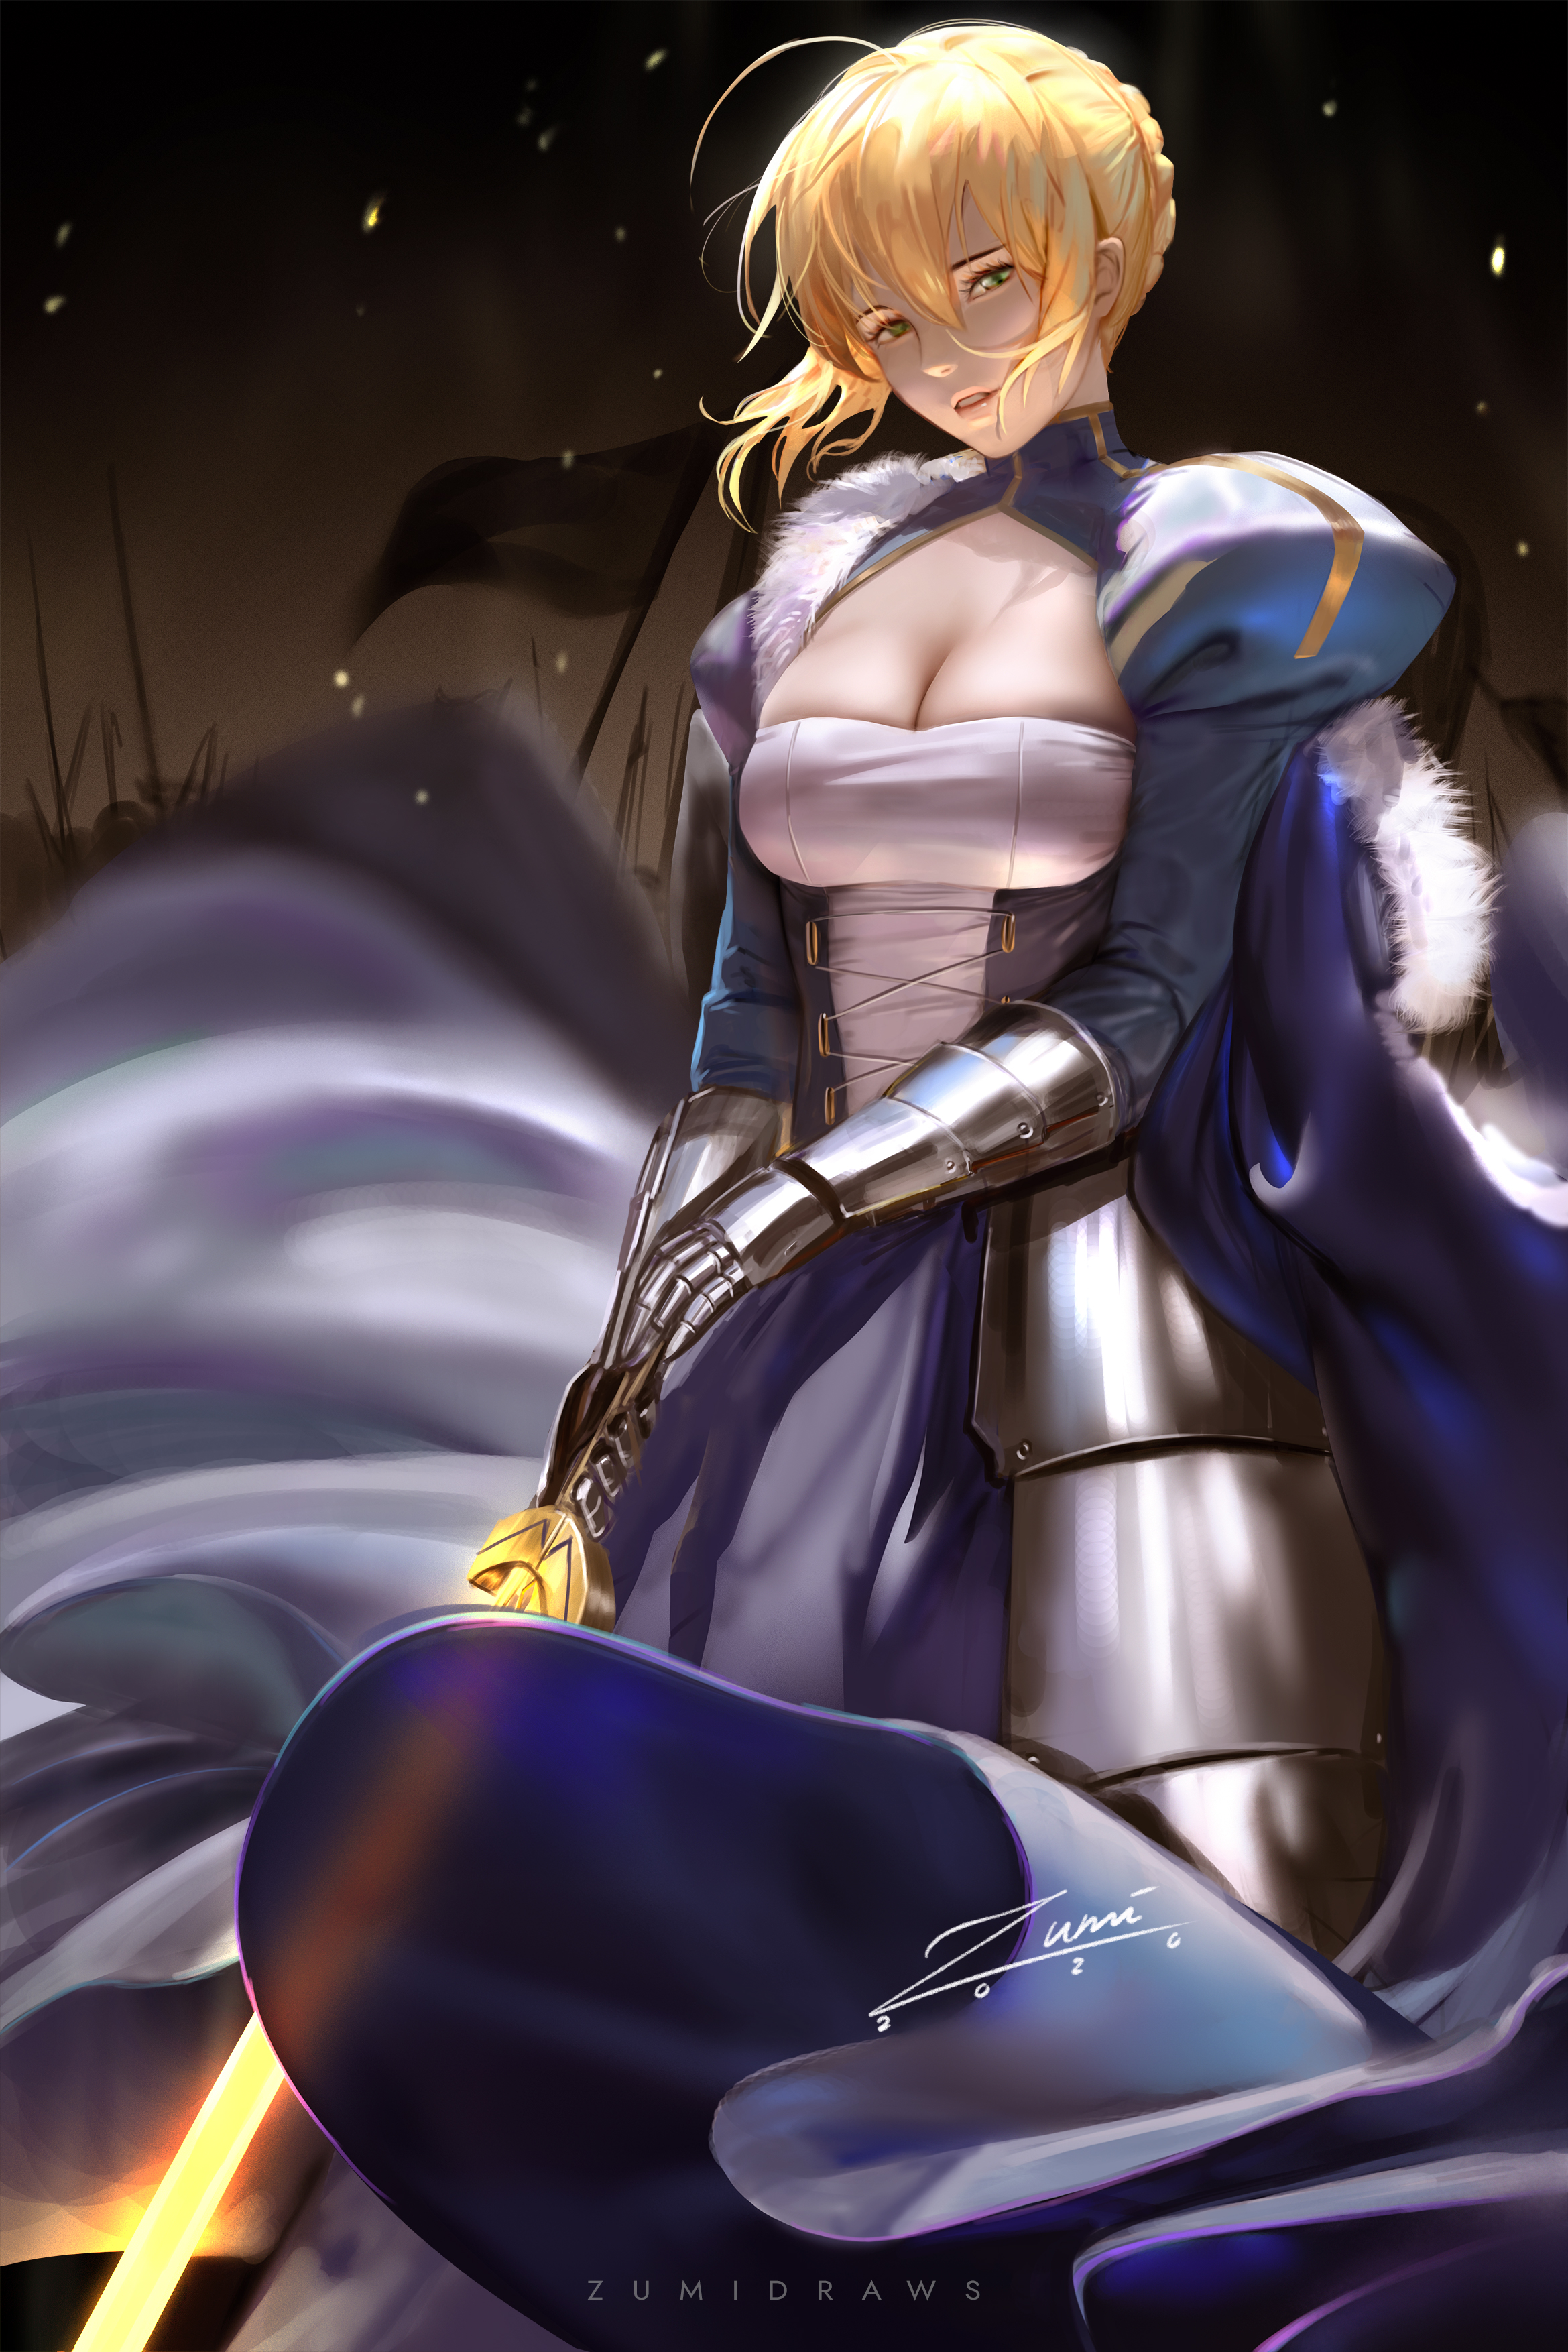 Saber Fate Series Anime Girls Fan Art Looking At Viewer Armor Cape Sword Girls With Swords Fantasy A 2339x3508